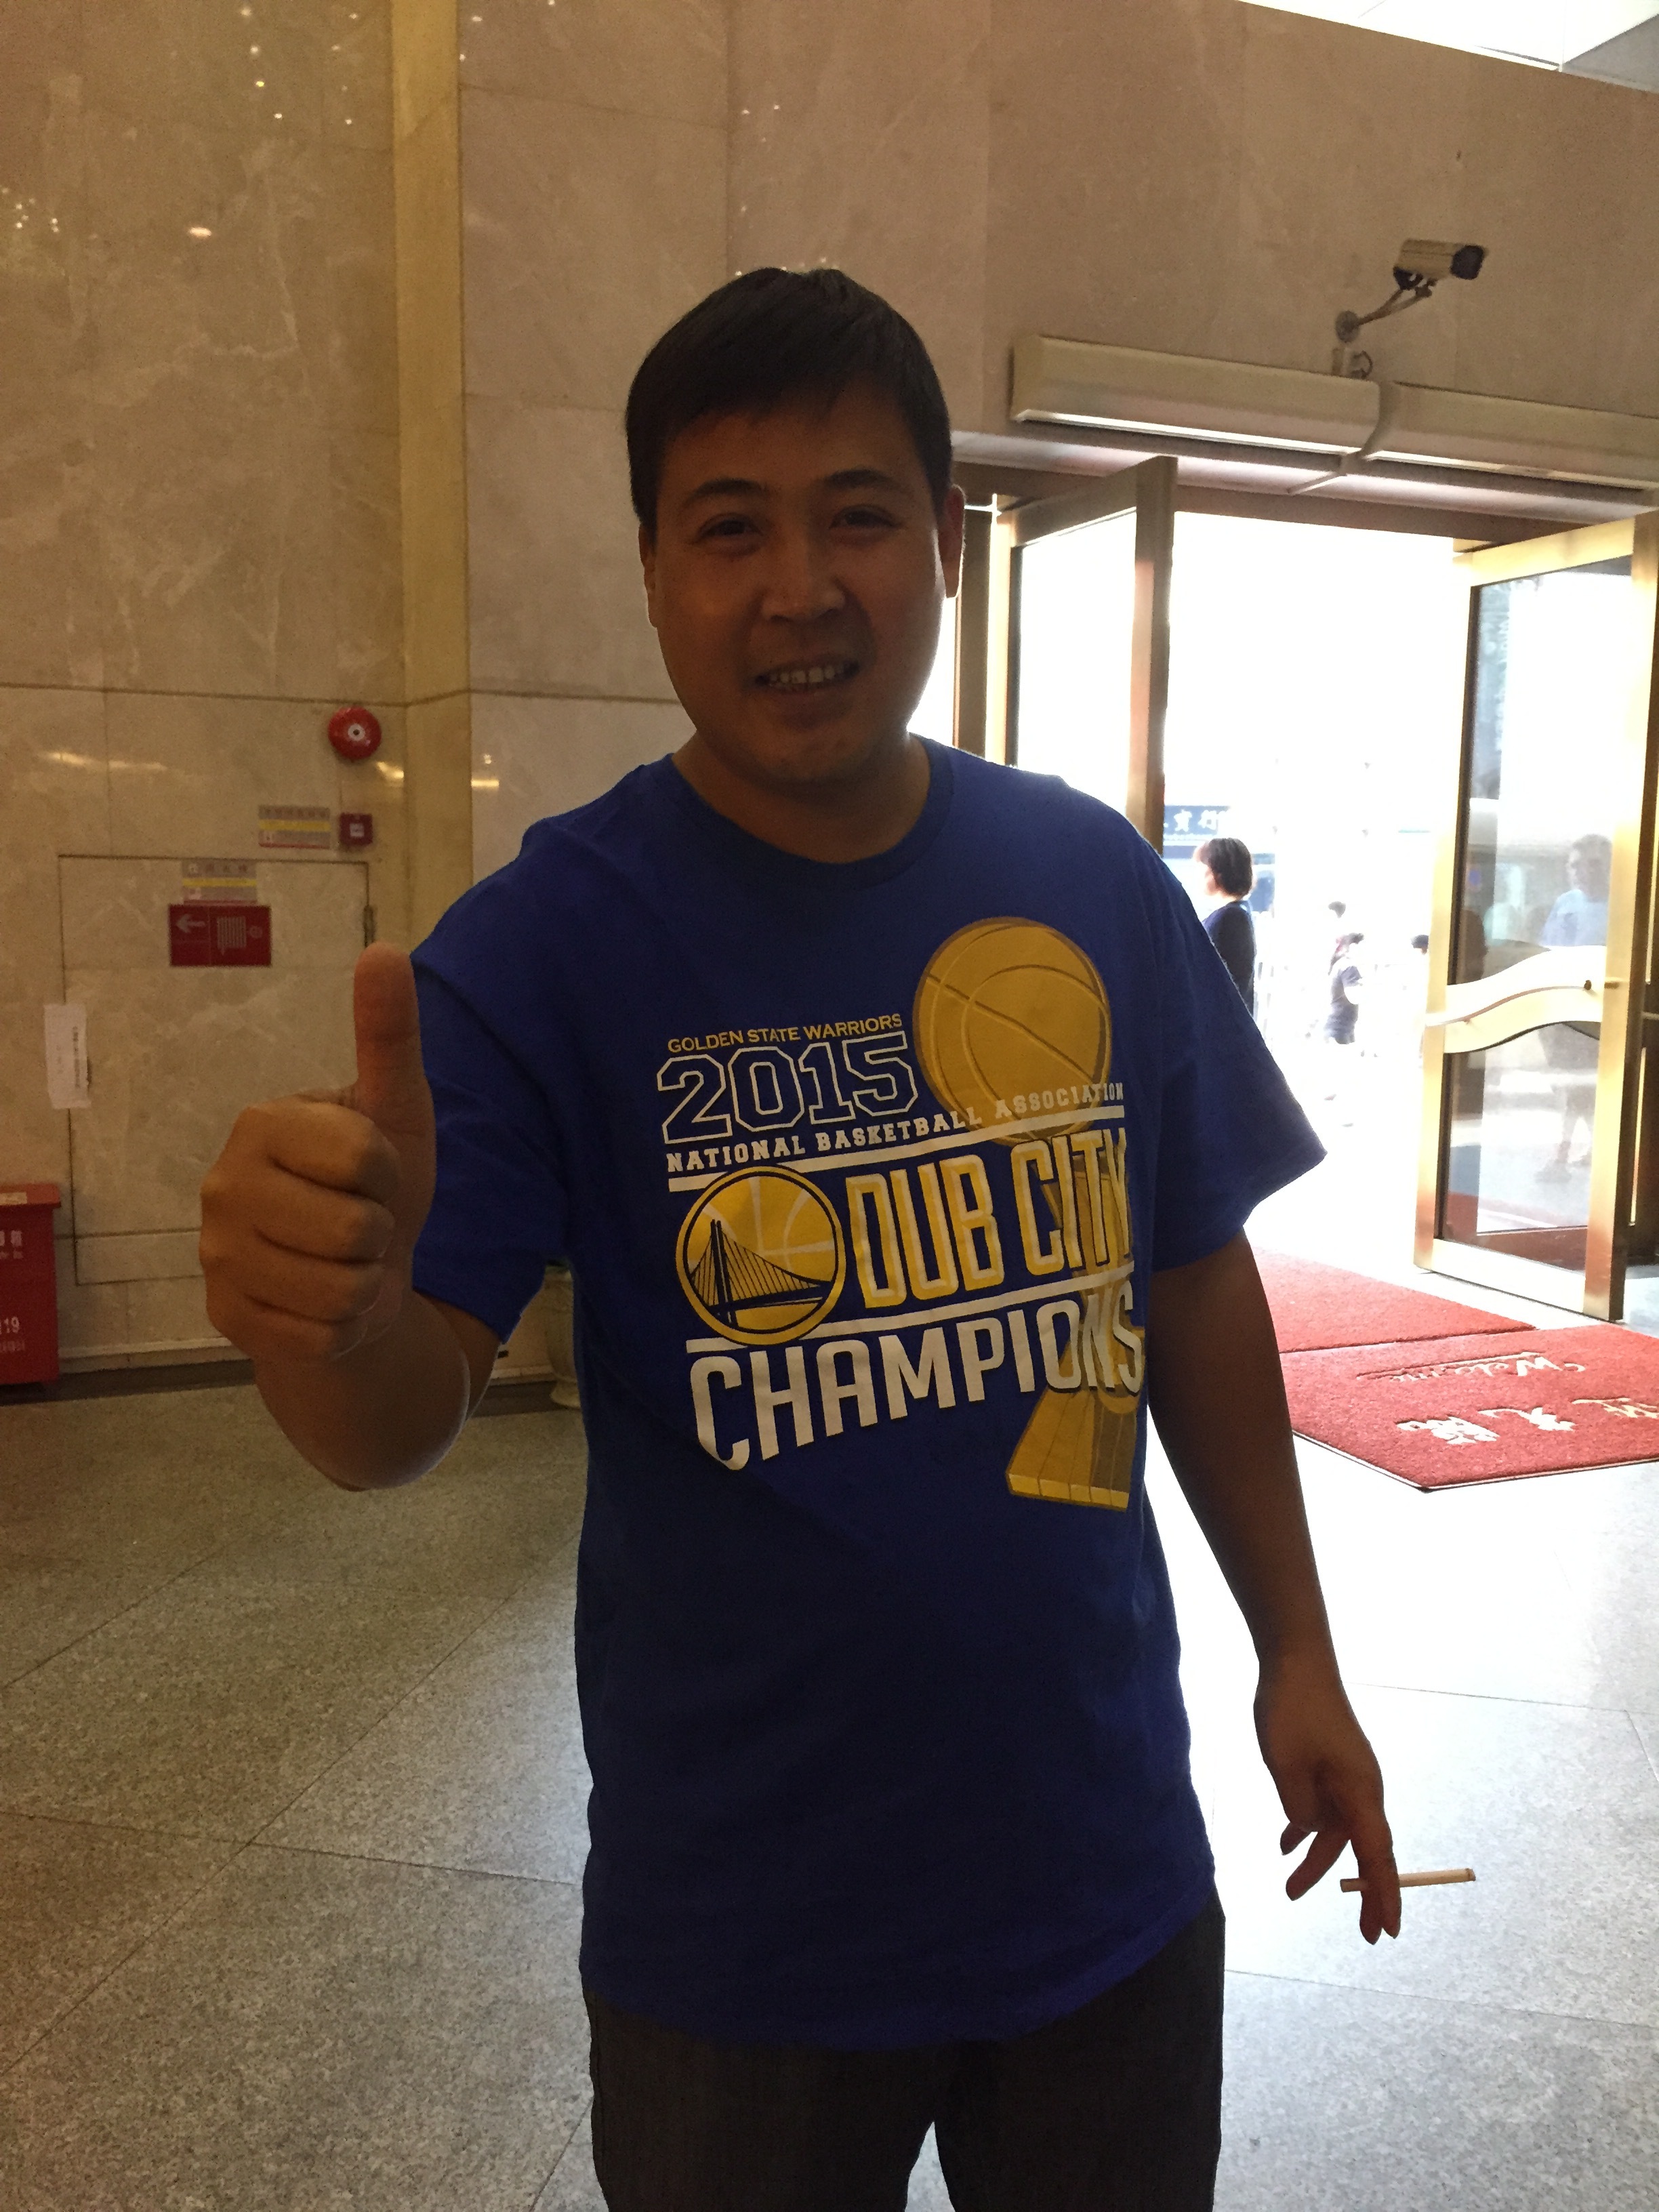 Sifu, Golden State's number one fan!